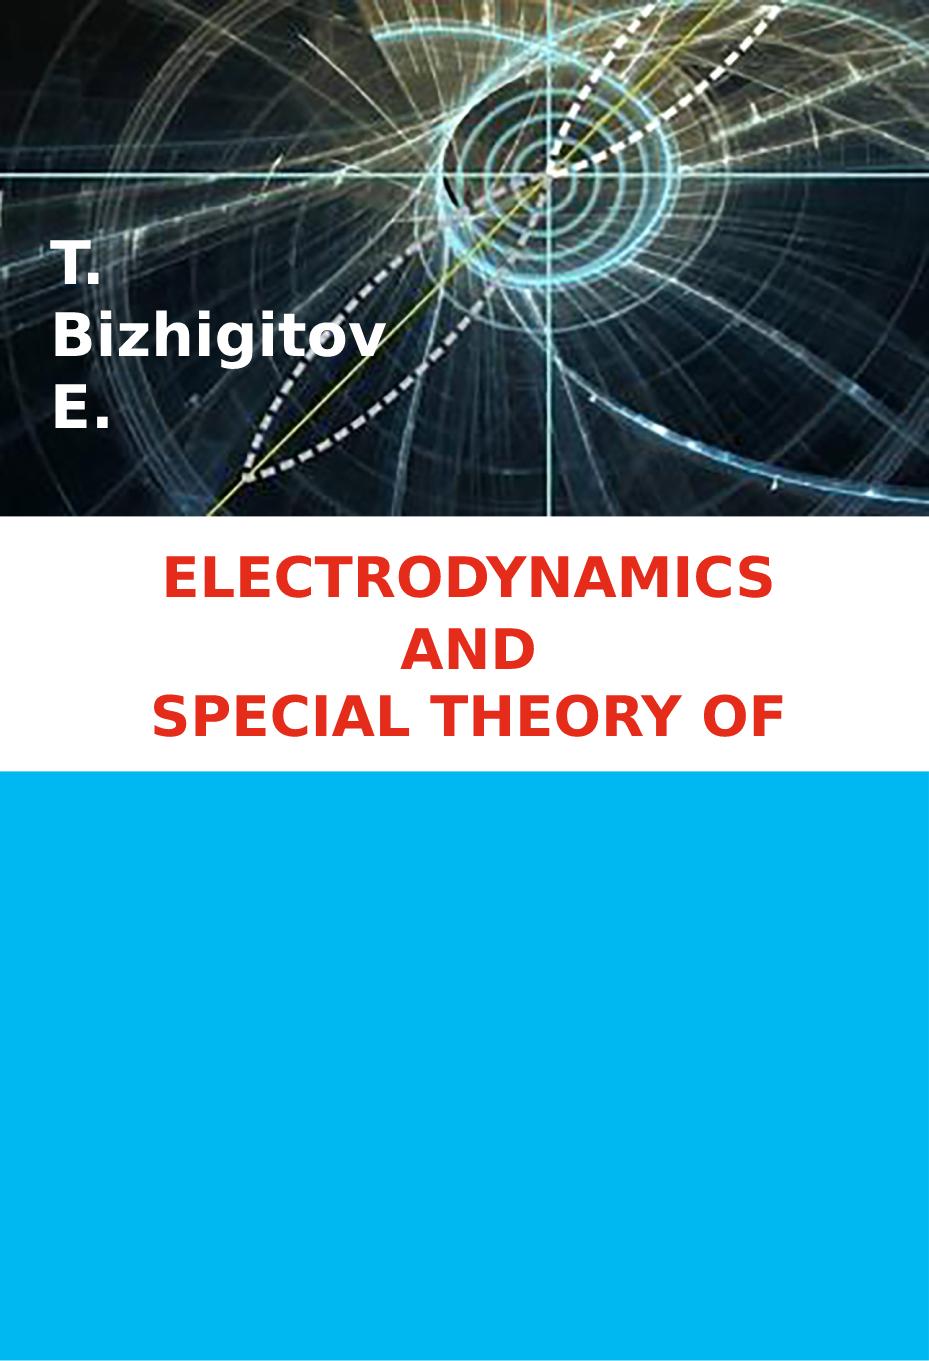 Electrodynamics and special theory of relativity